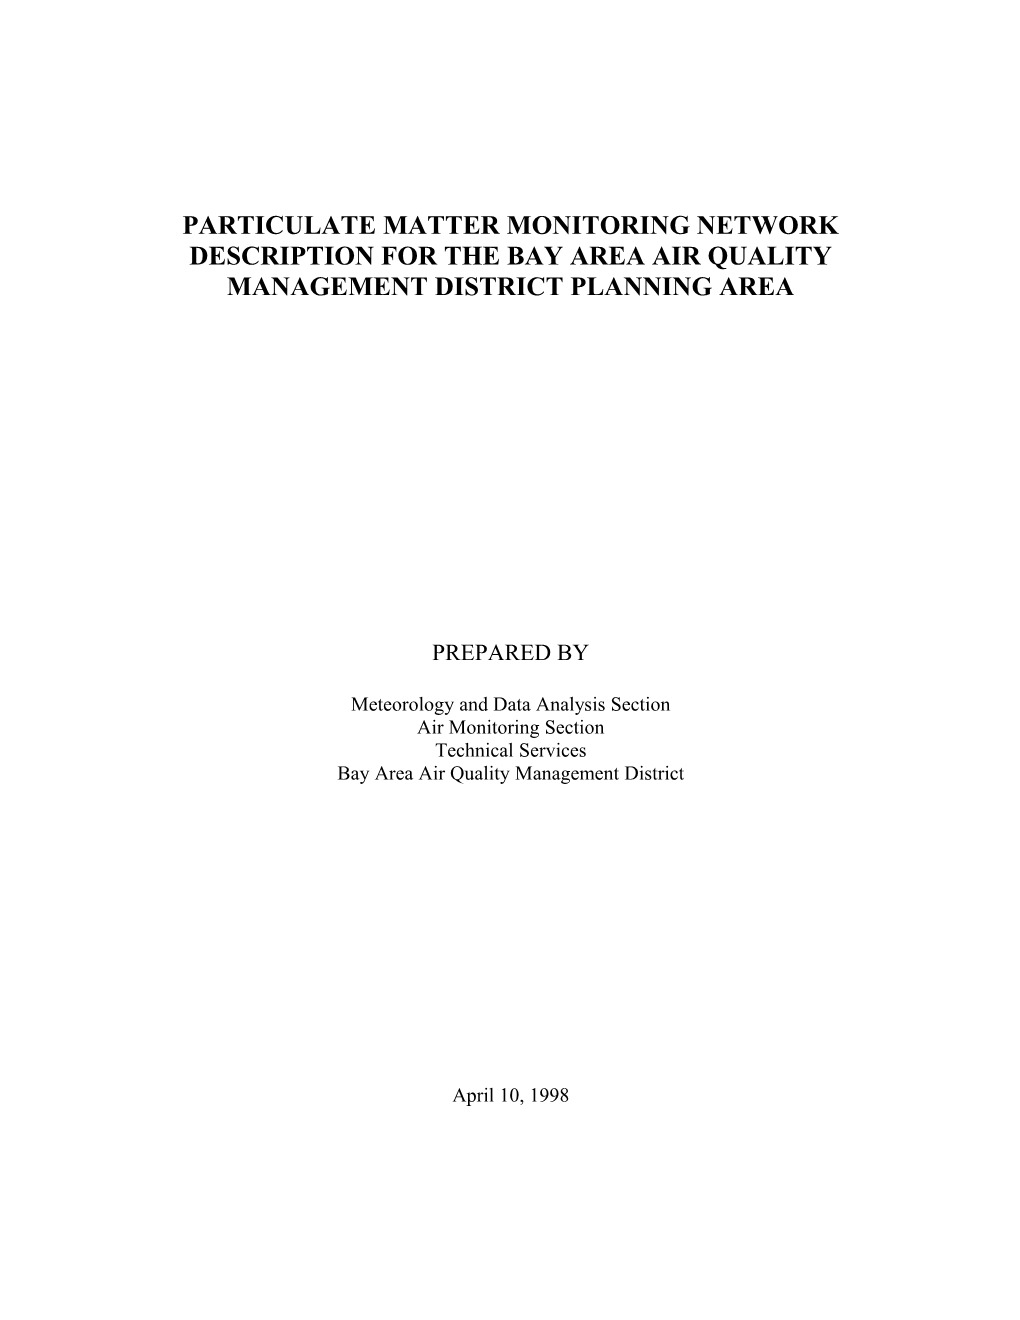 Particulate Matter Monitoring Network Description for the Bay Area Air Quality Management